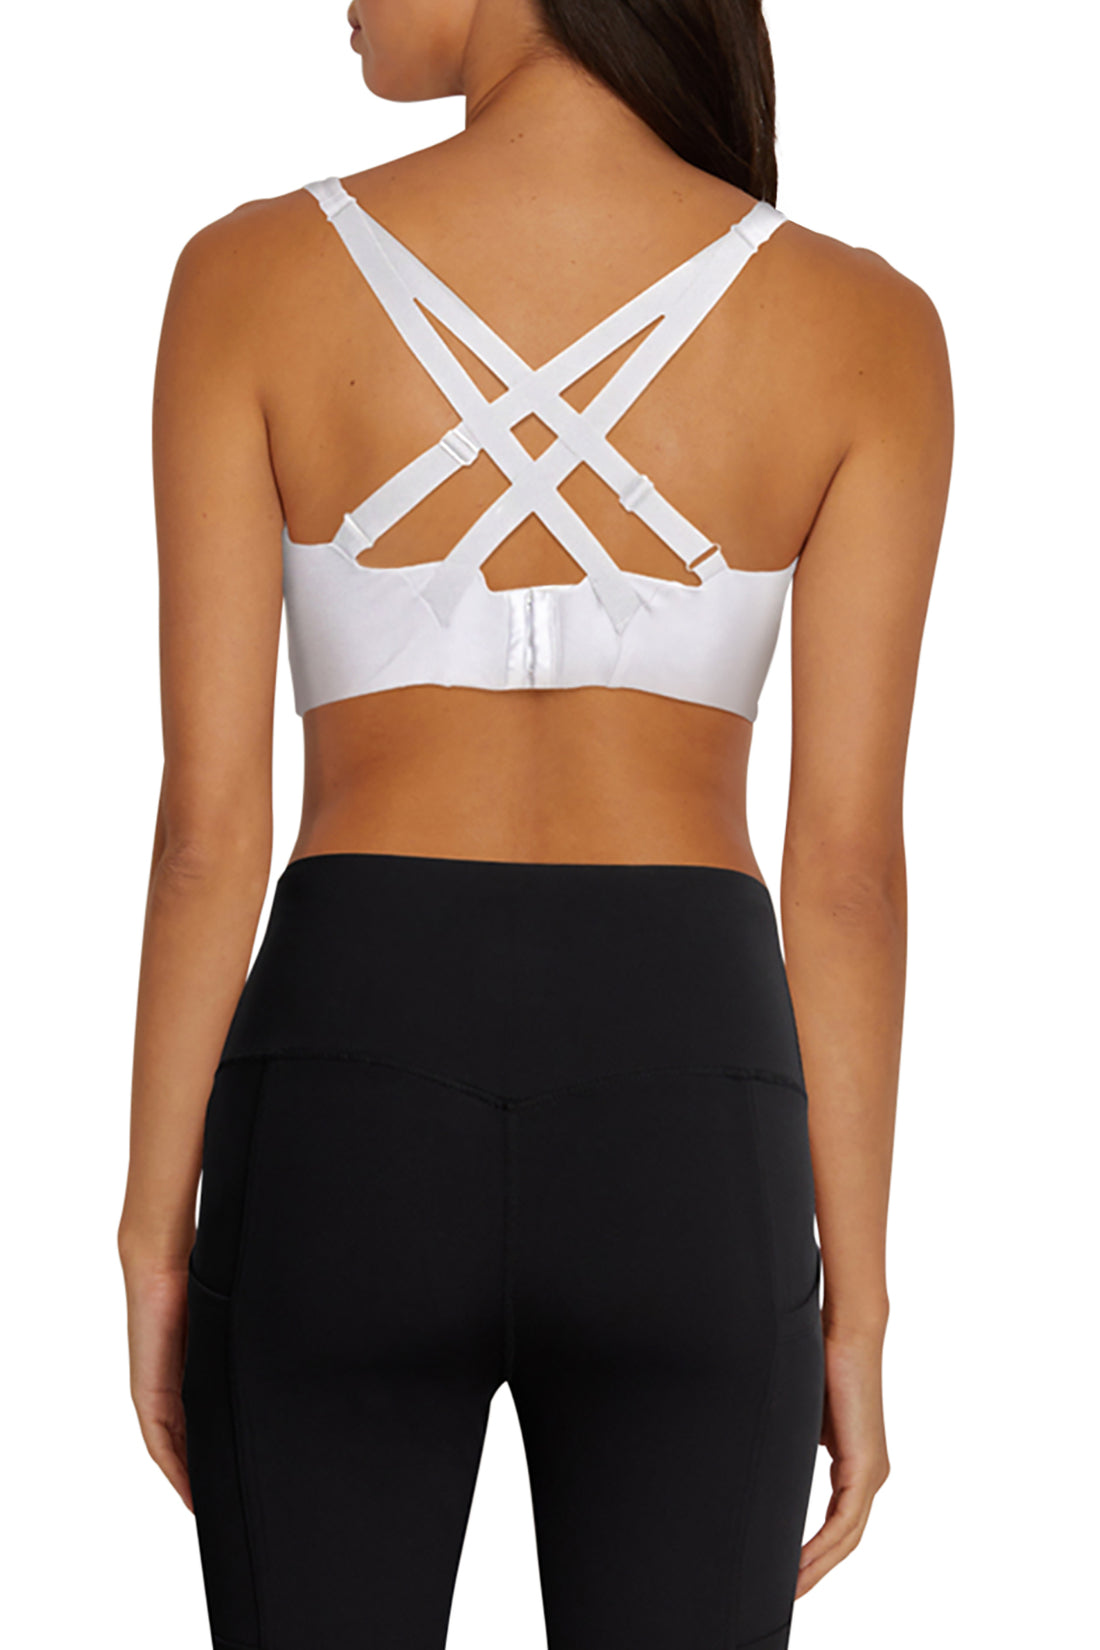 Molded Cup Sports Bra at best price in Mumbai by Ginza Industries Ltd.